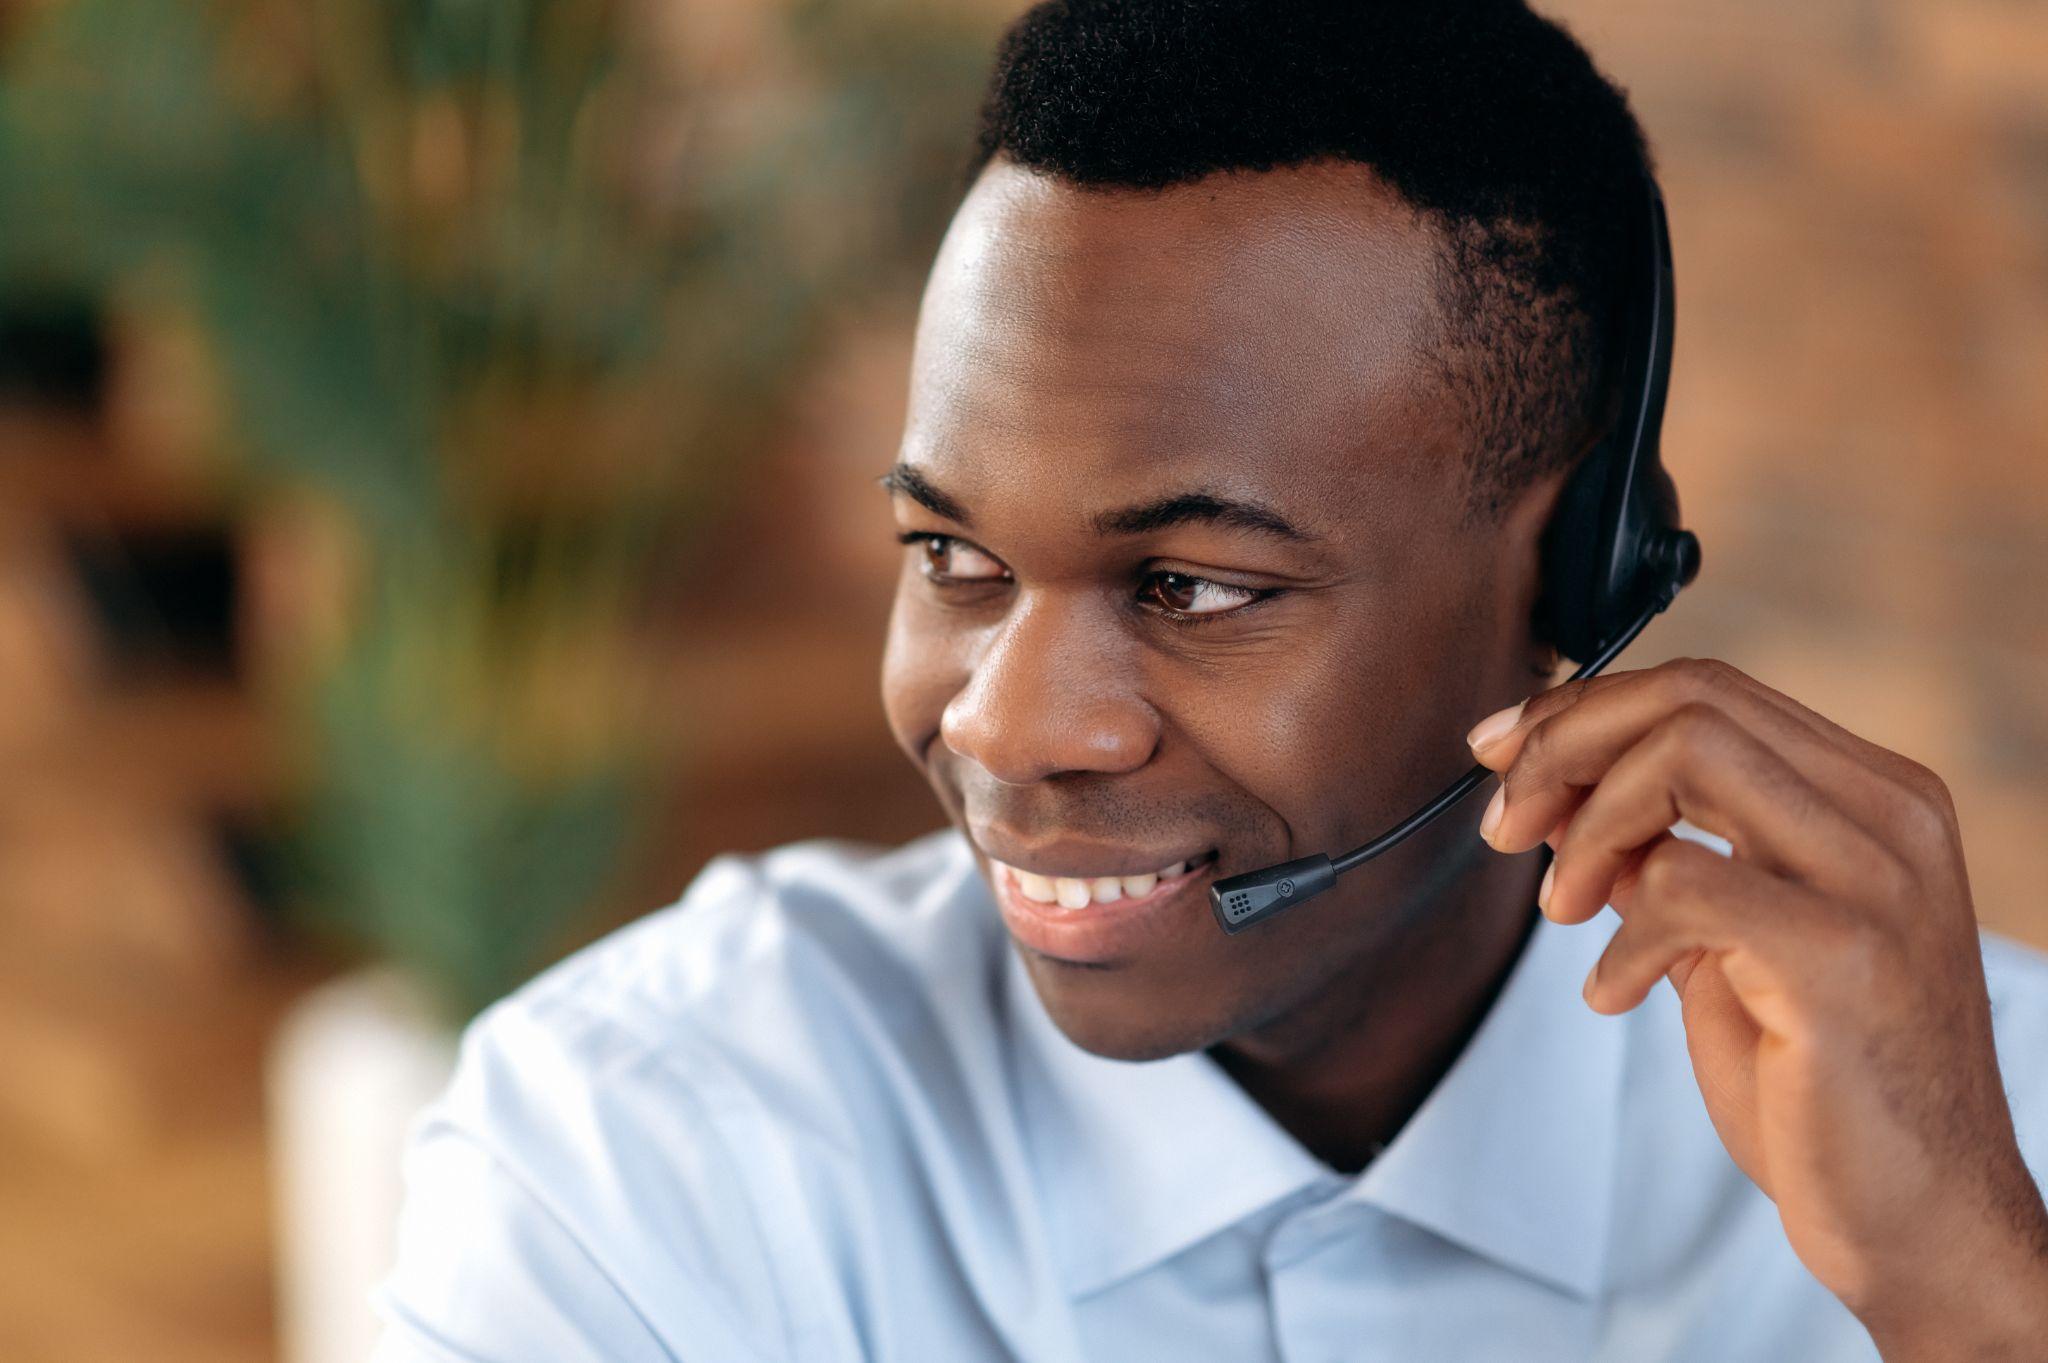 African american call operator in headset. Call center business or customer service concept